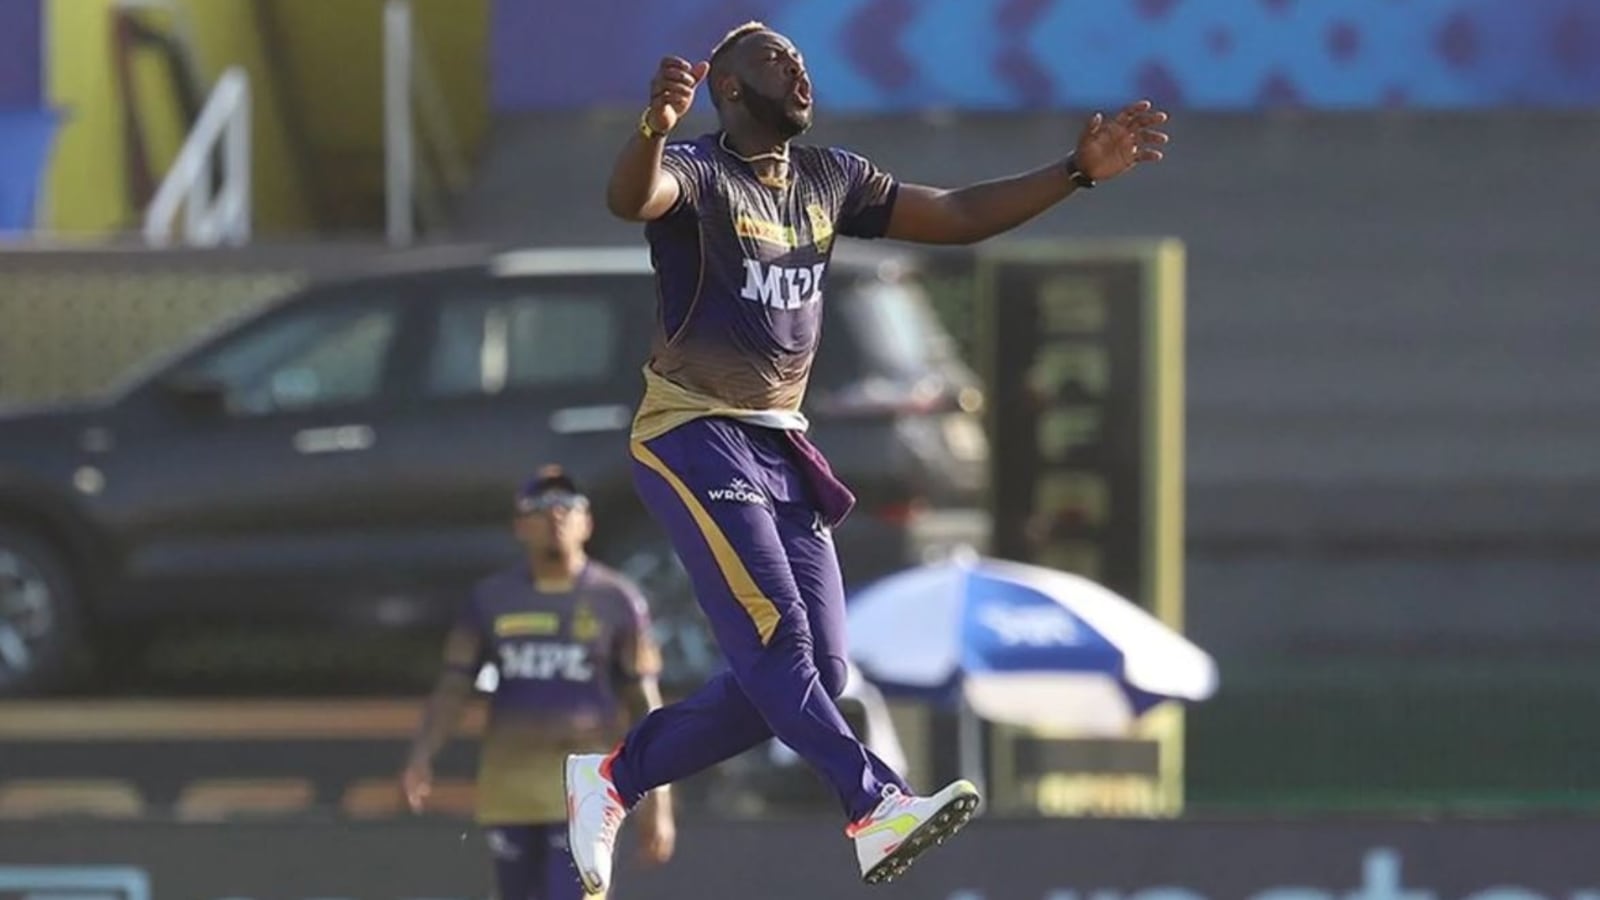 IPL 2021: KKR vs MI Play of the Day – Andre Russell's lethal final